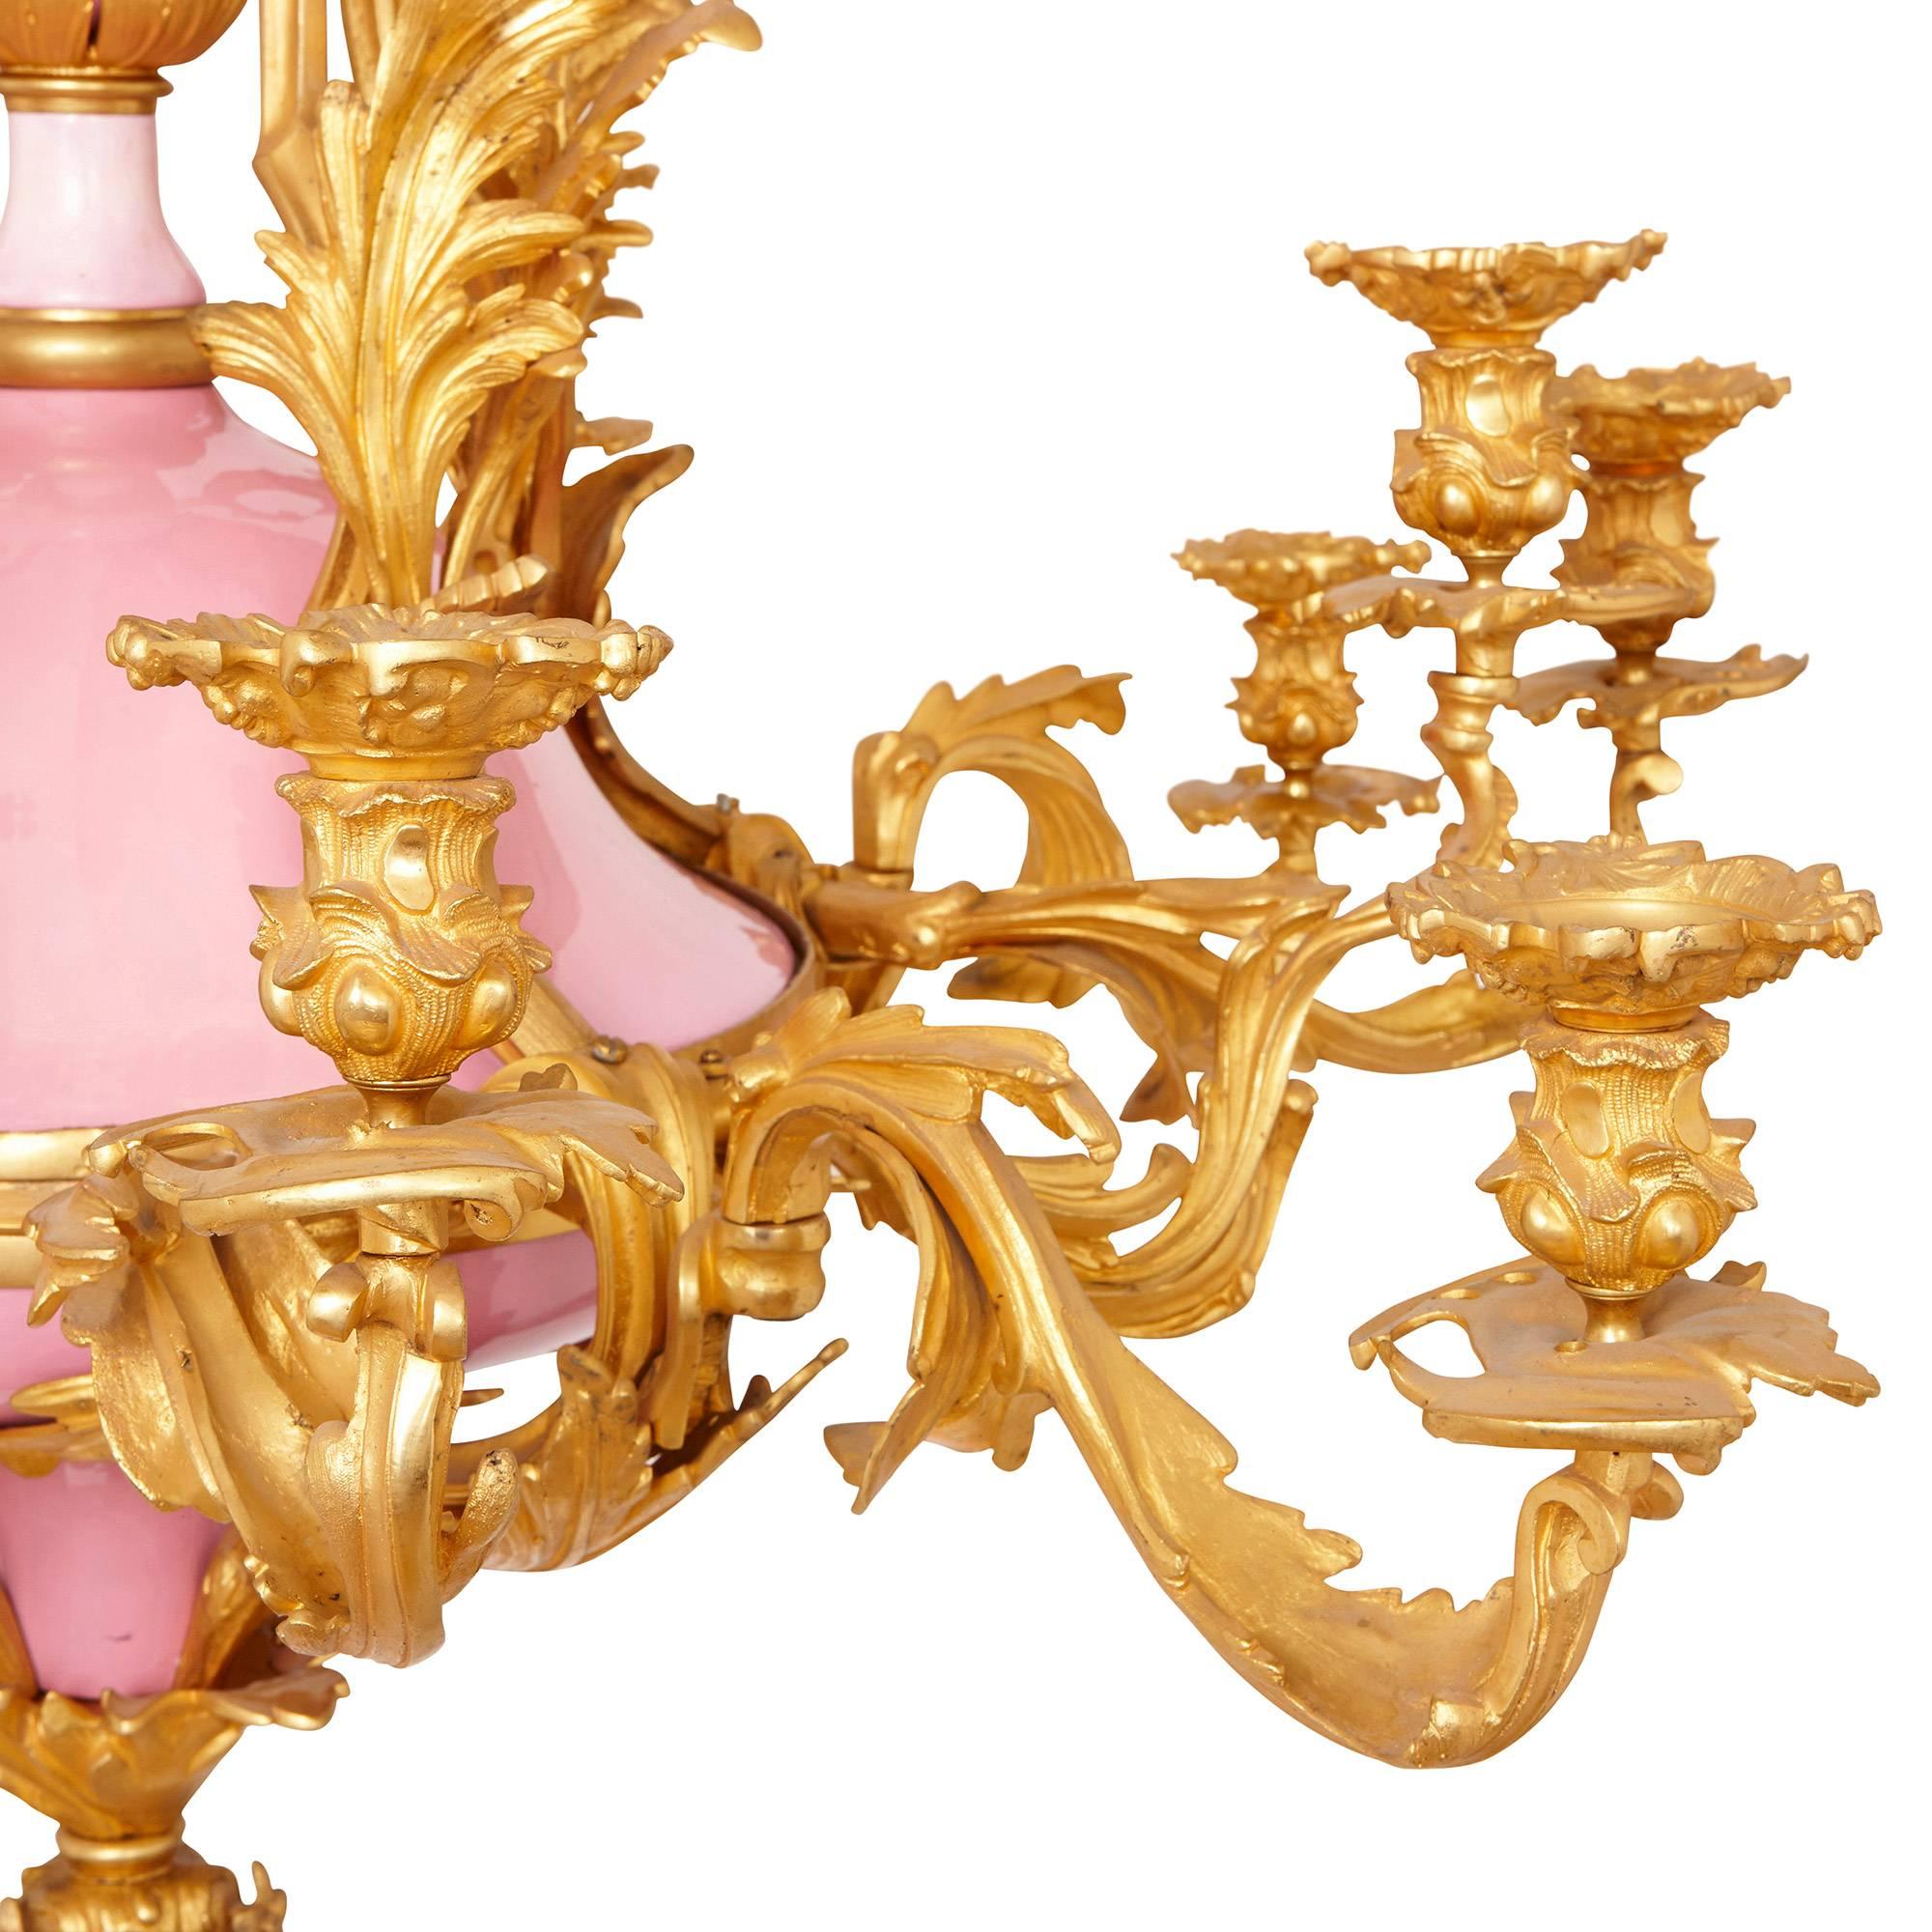 This beautiful antique French chandelier is crafted in the elegant Belle Époque style. The chandelier features a delicate pink porcelain body, which is offset by the surrounding golden gilt bronze to create a vivid visual contrast. Issuing from the